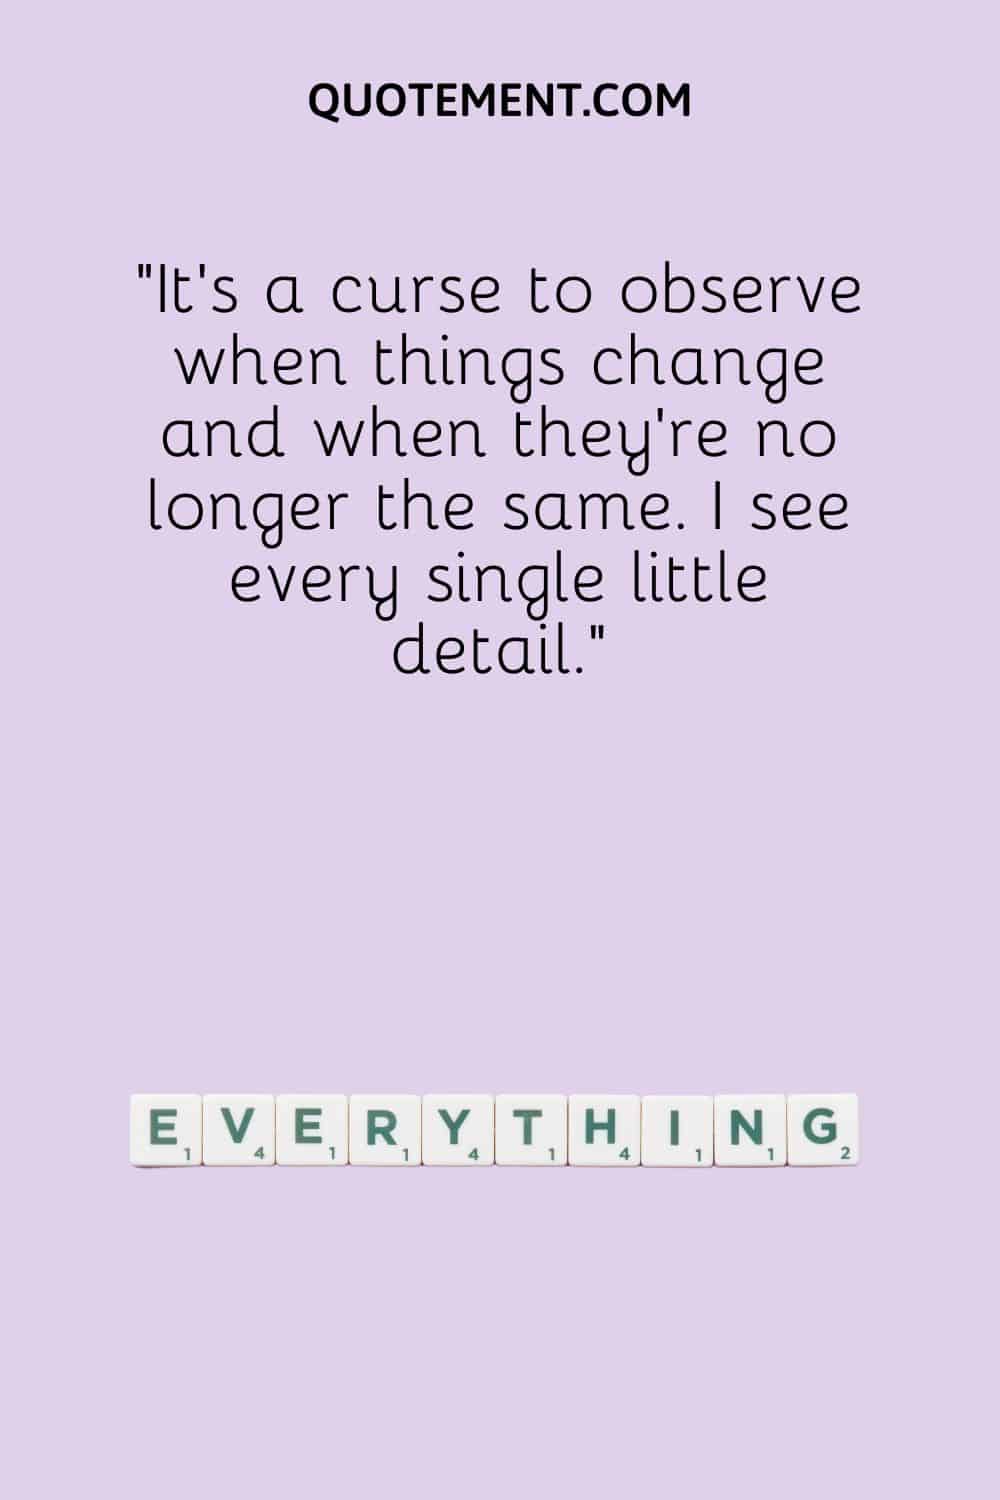 It’s a curse to observe when things change and when they're no longer the same. I see every single little detail.